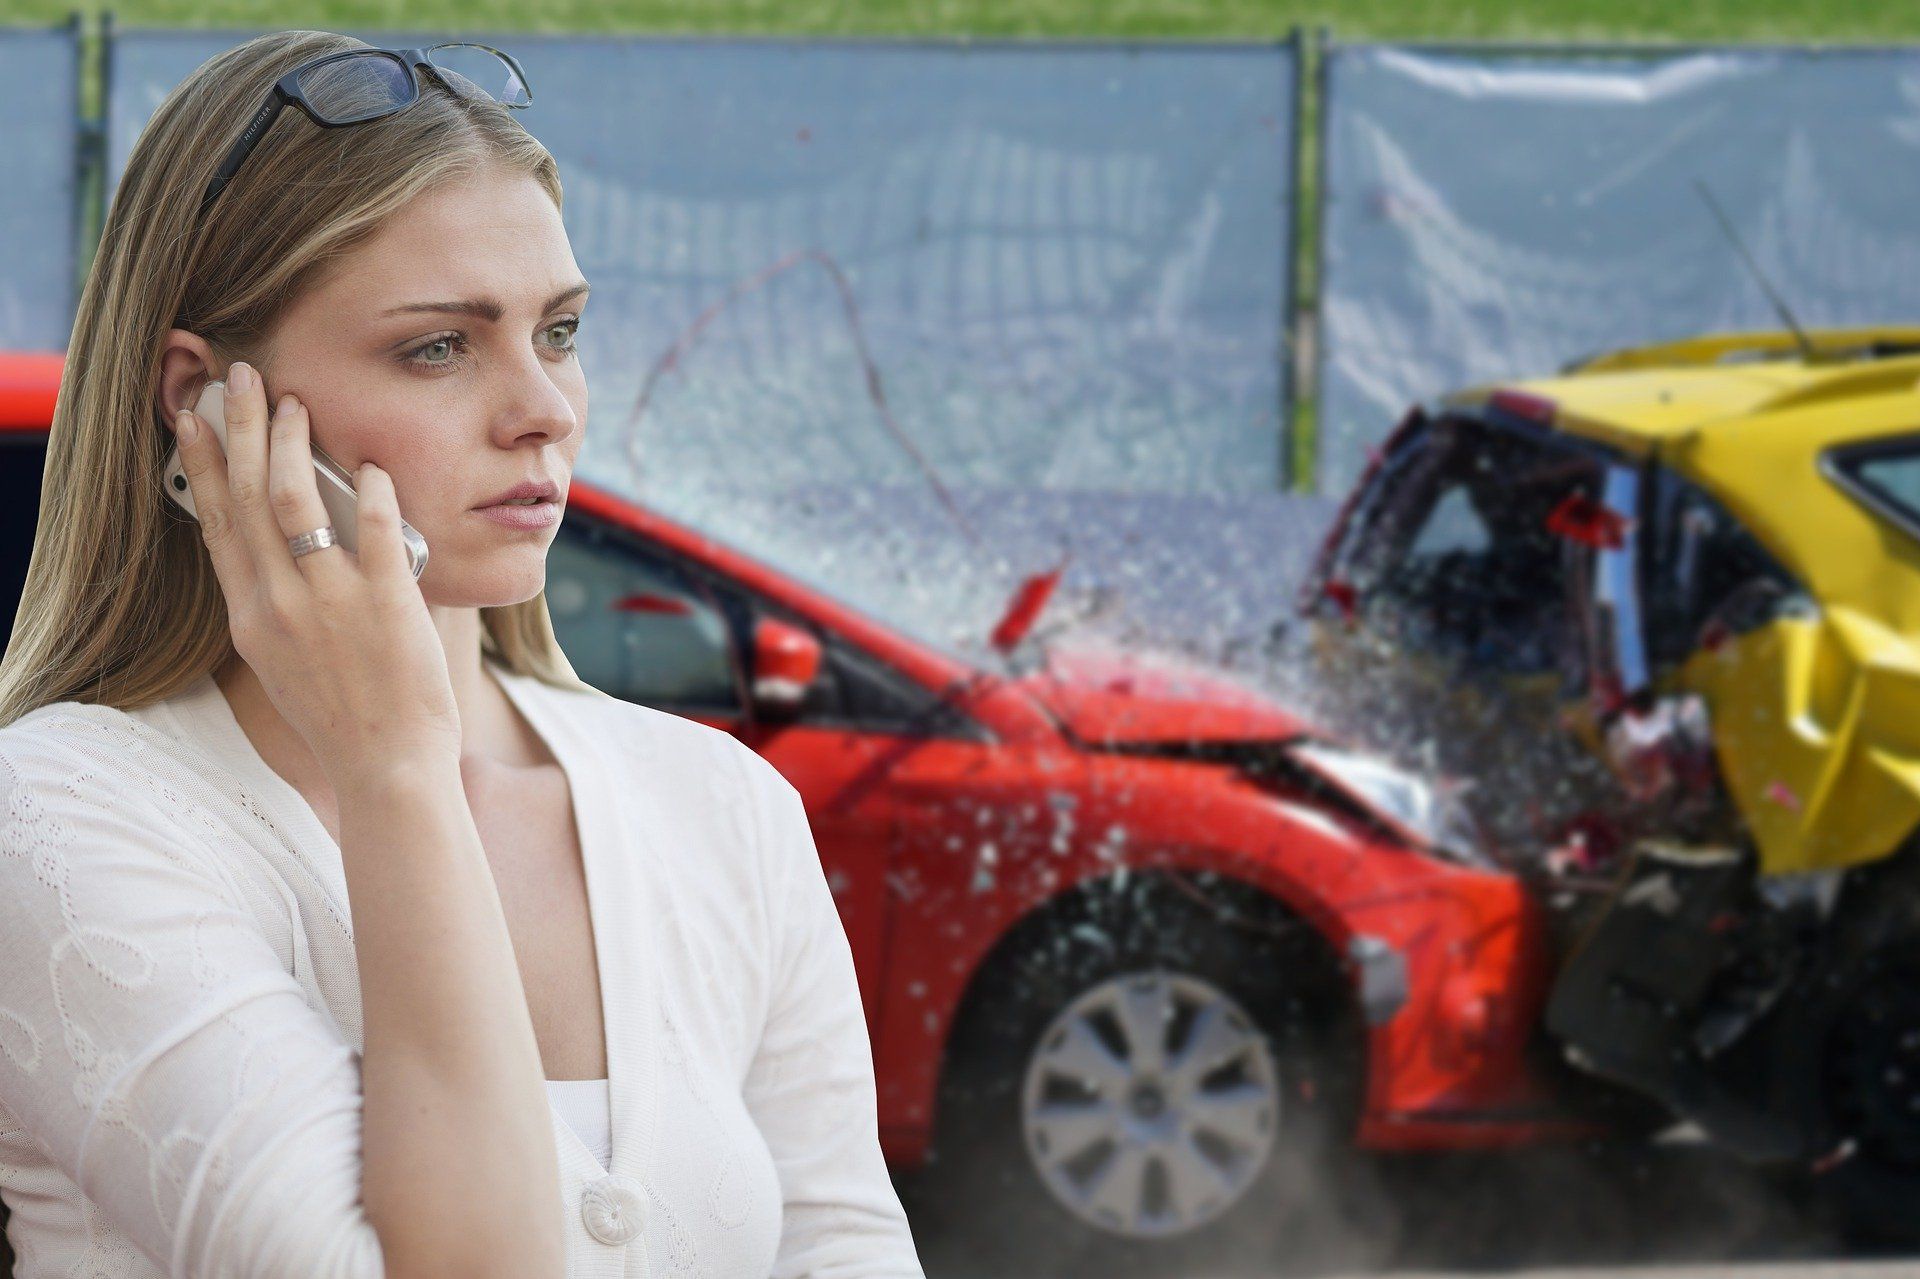 Person on phone after accident